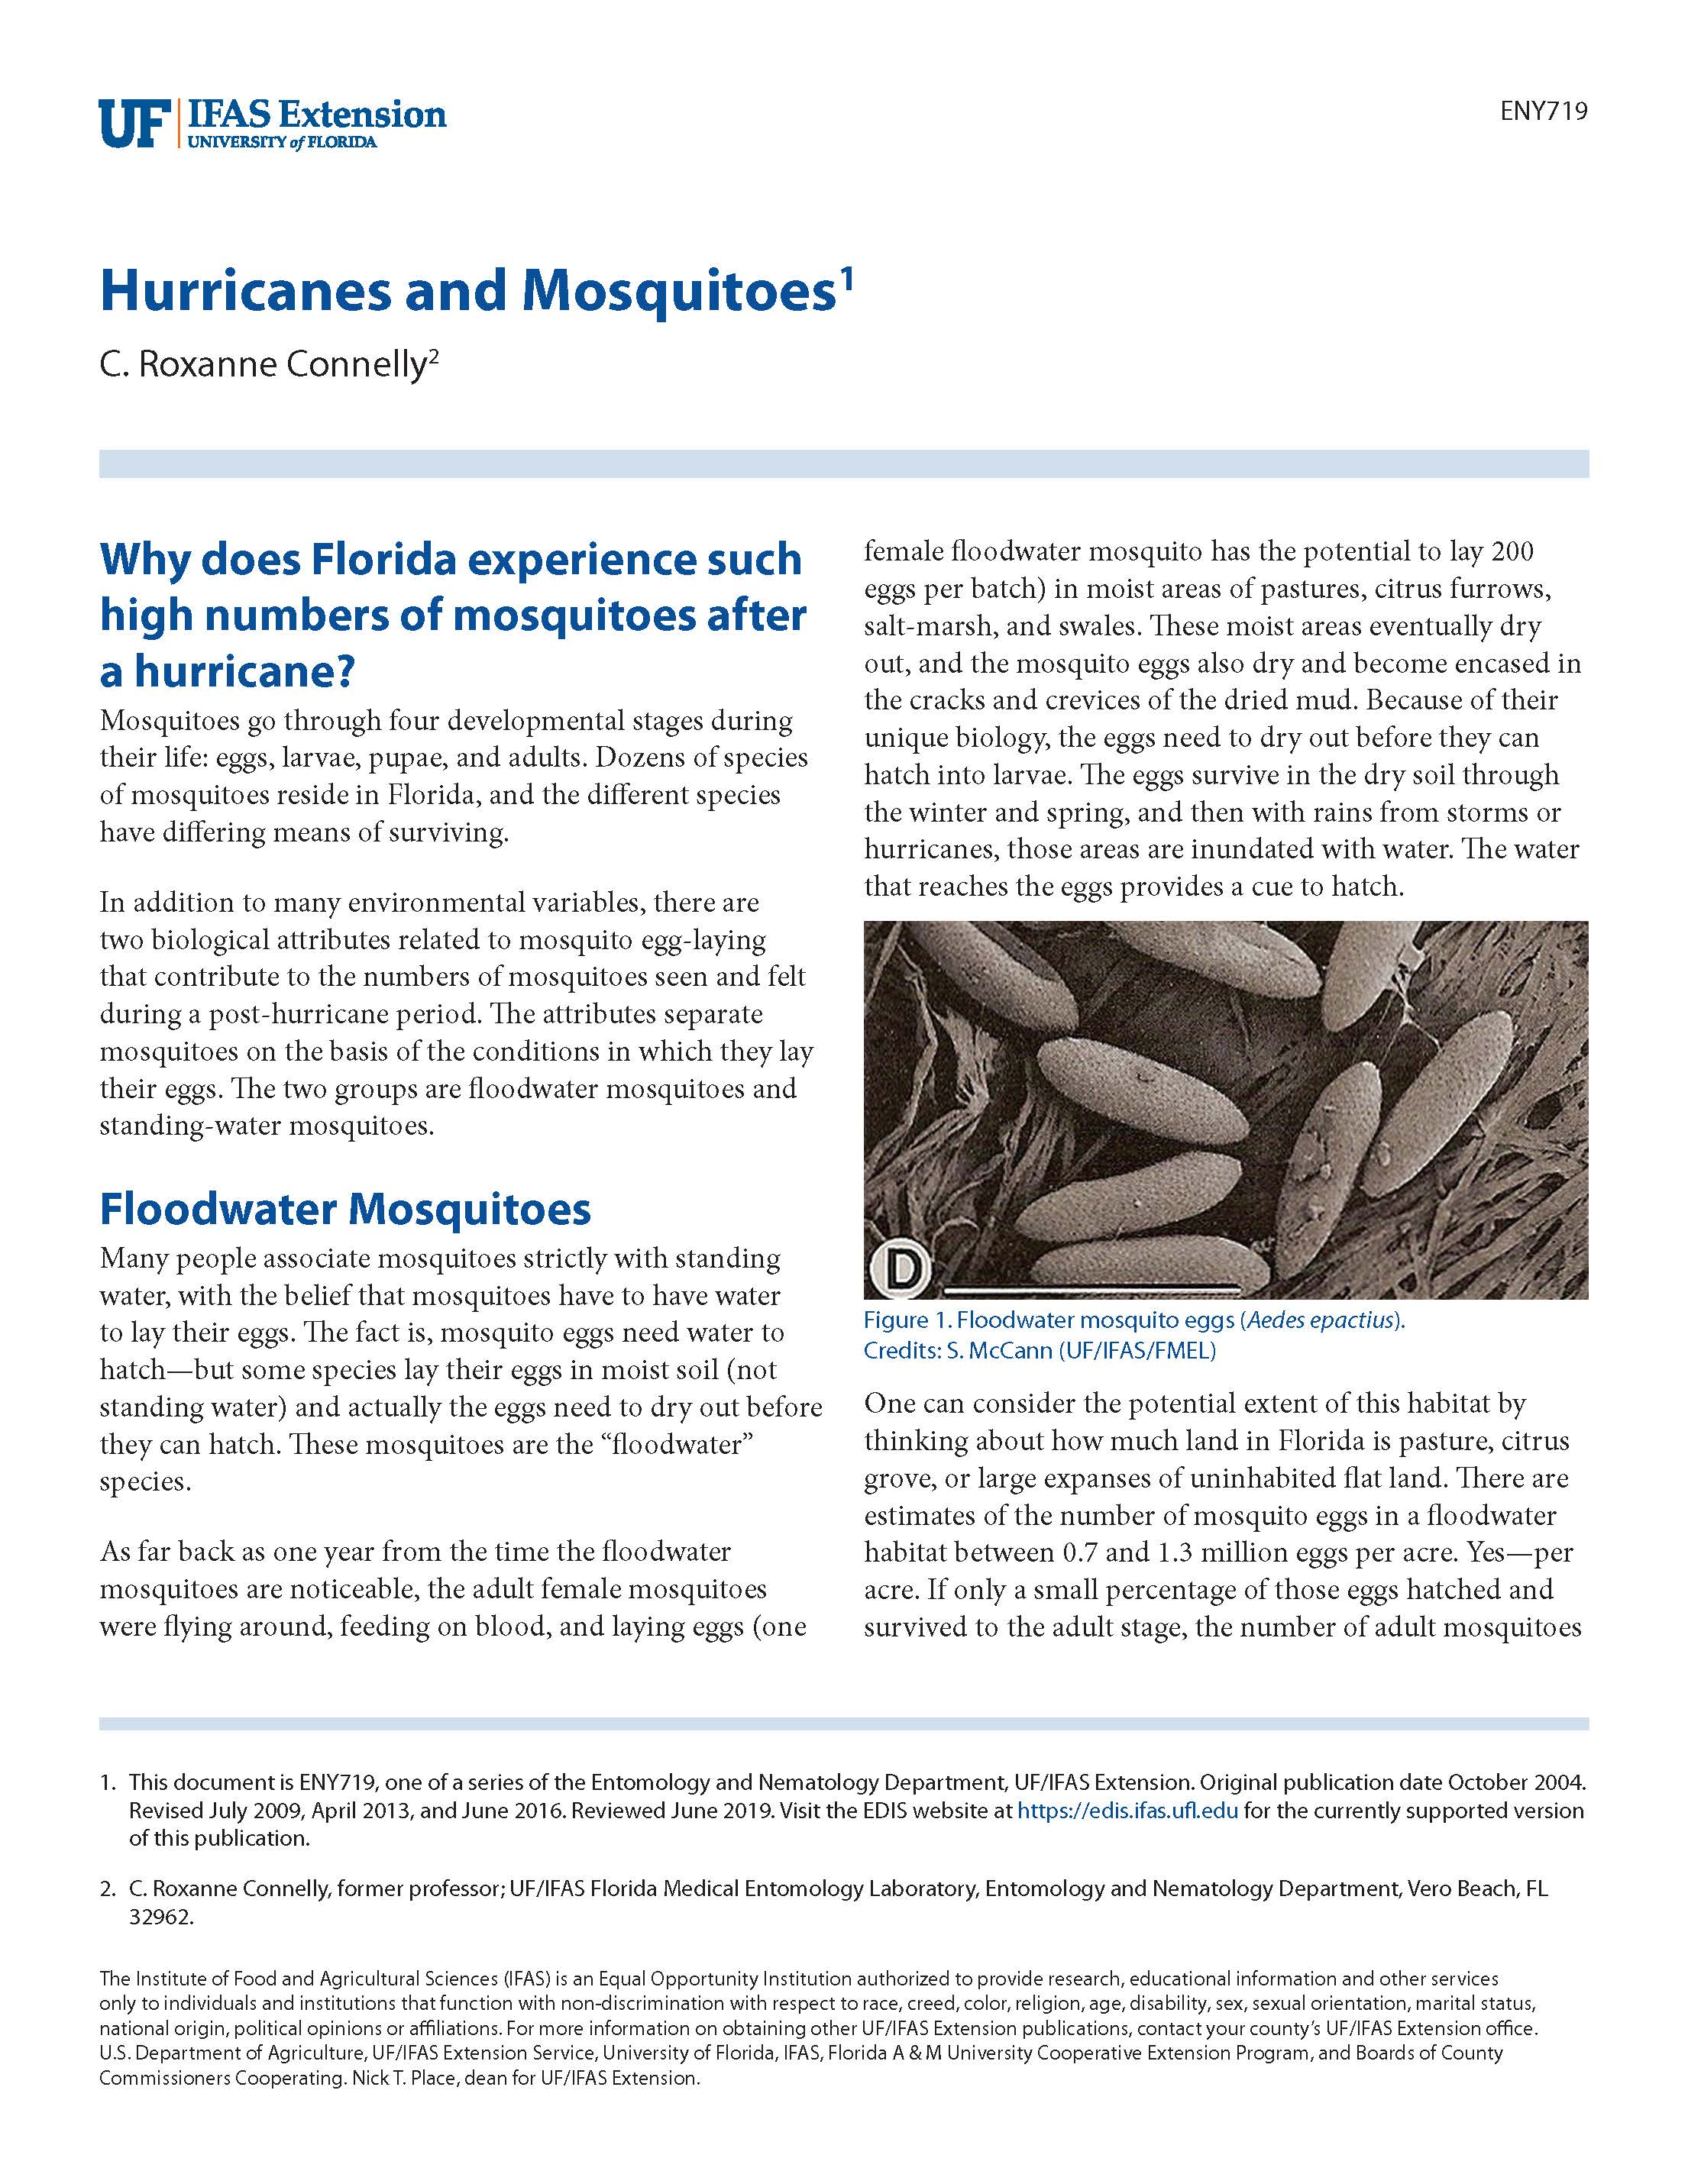 Hurricanes and Mosquitoes_Page_1 Article from Roxanne Connelly IFAS extention 